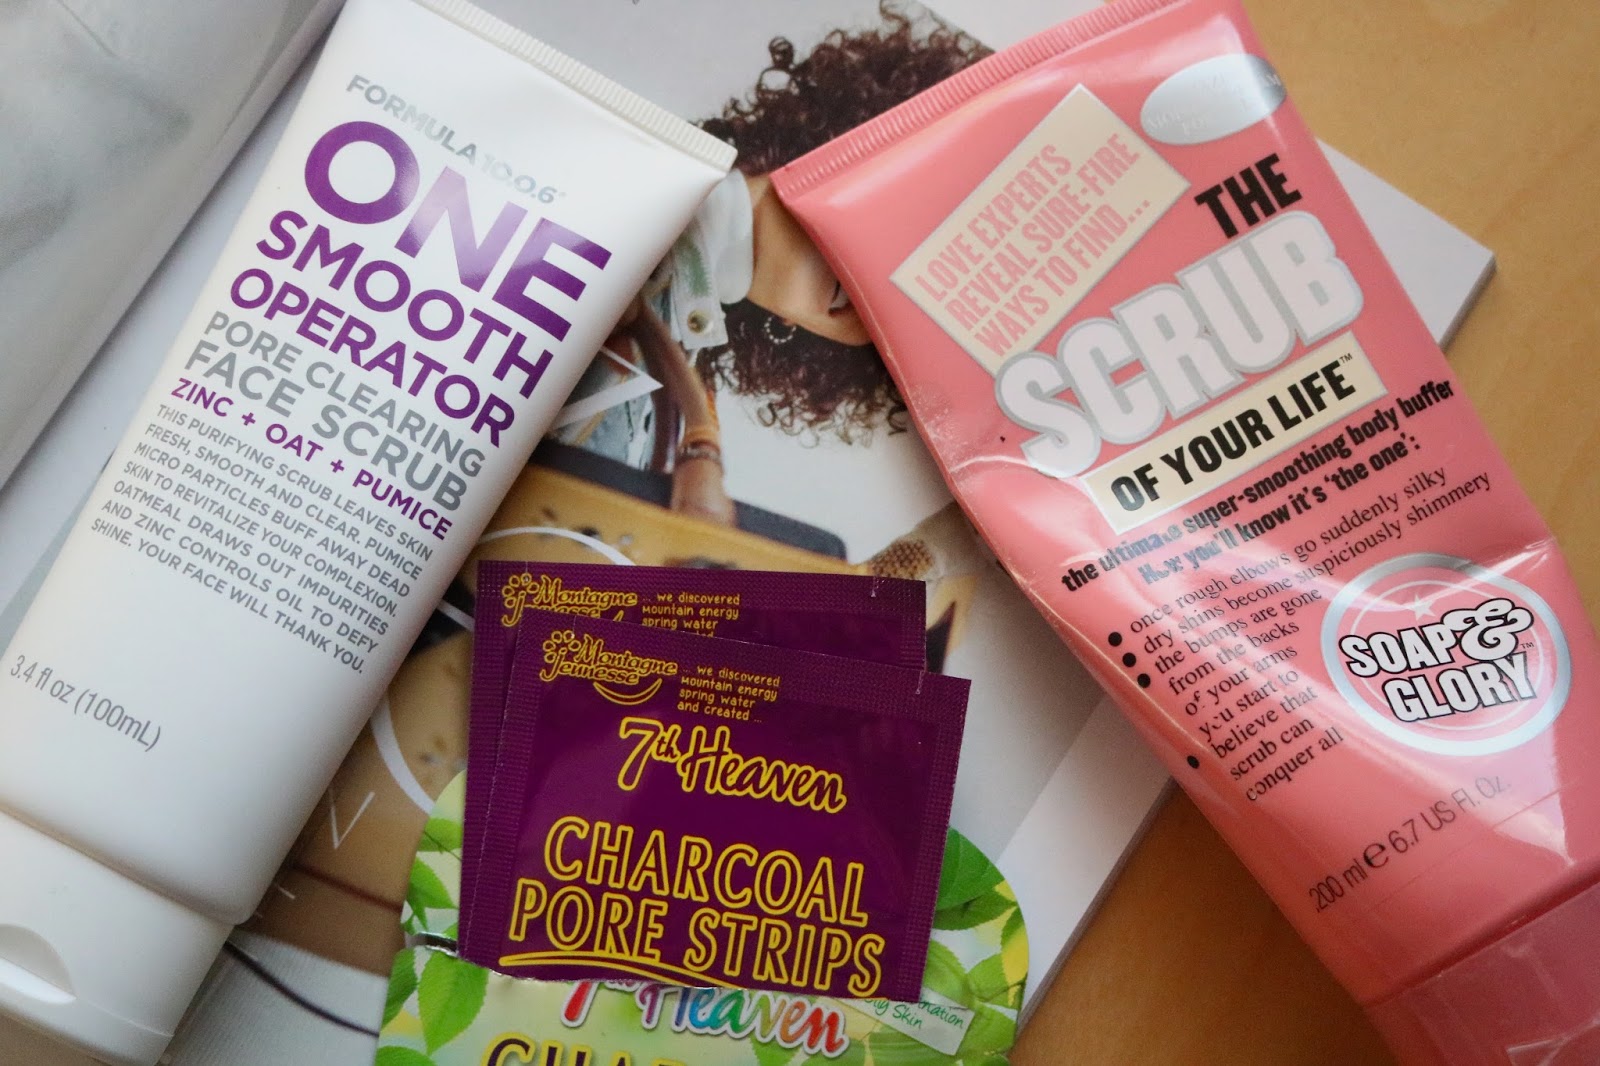 formula 10.0.6 one smooth operator face scrub, 7th heaven charcoal nose strips and soap & glory's scrub of your life